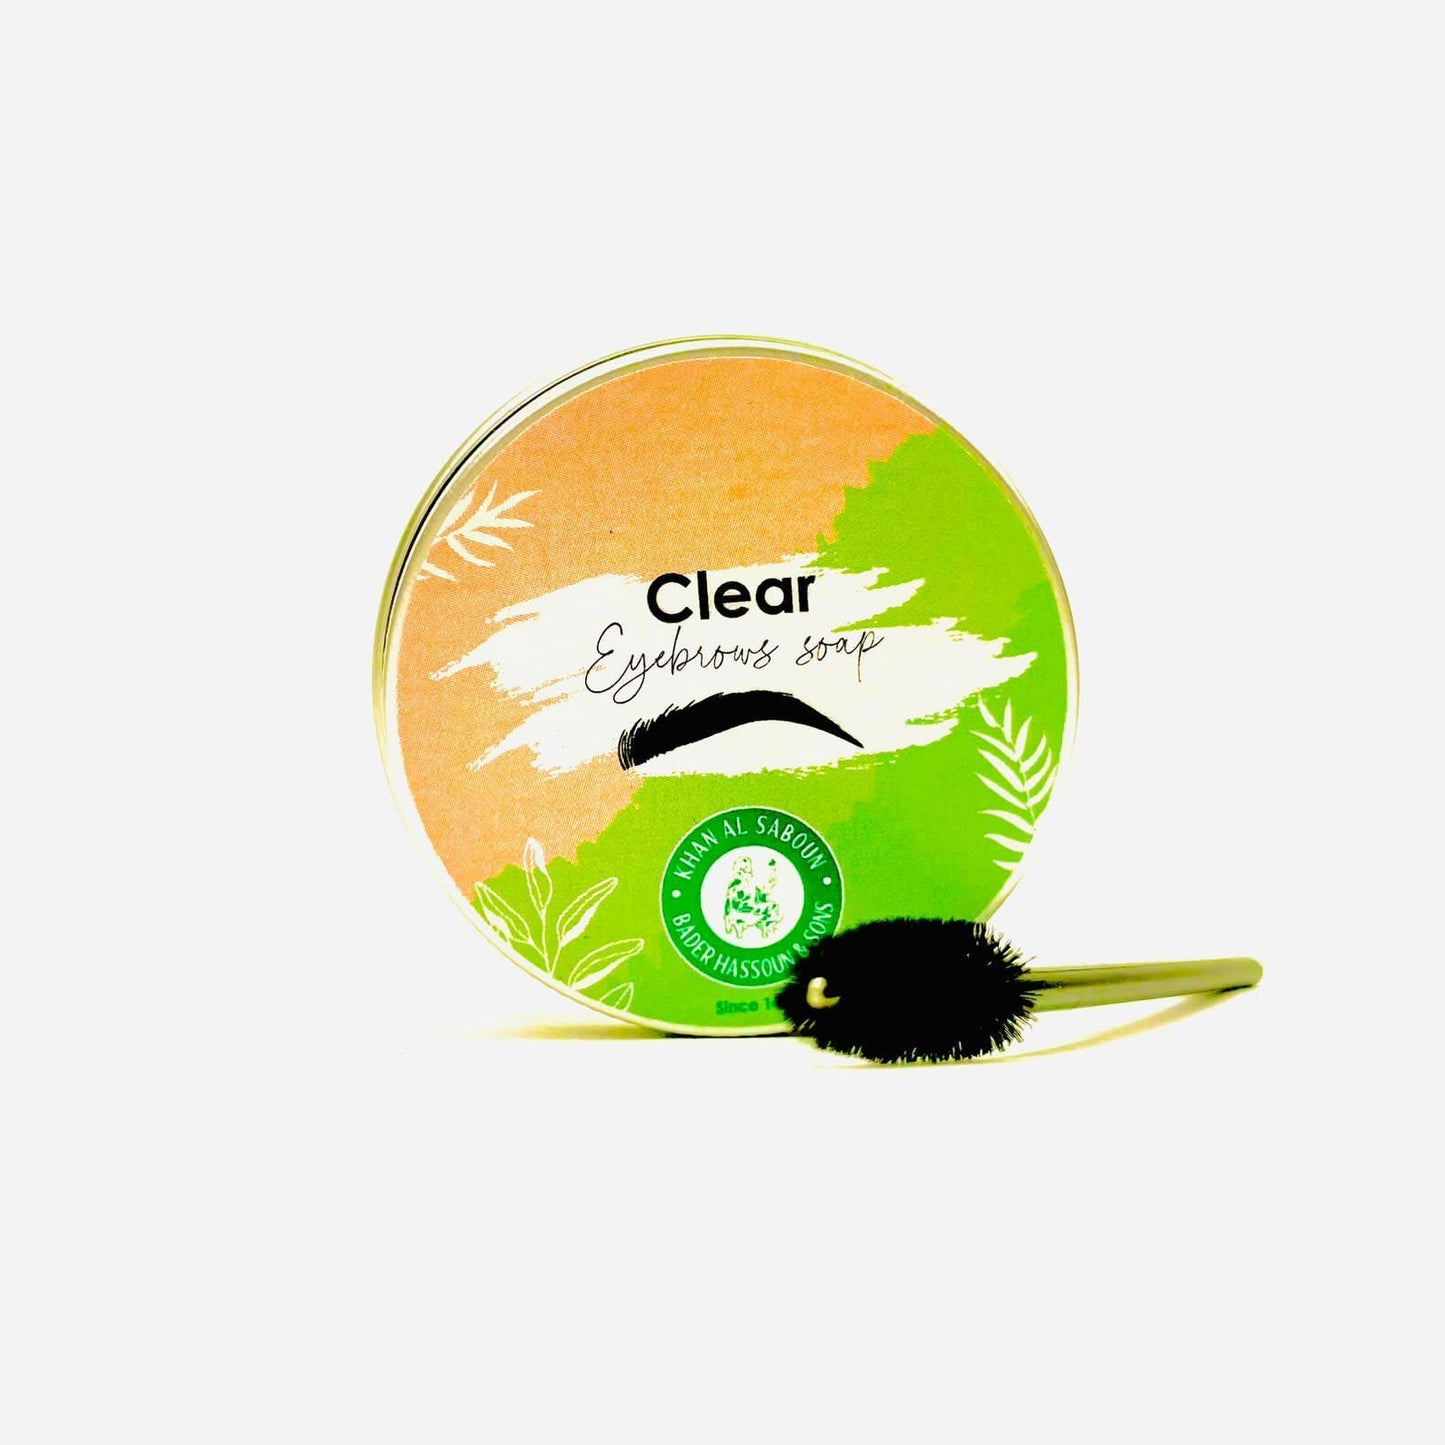 Eyebrow soap "Clear" (Colorless)